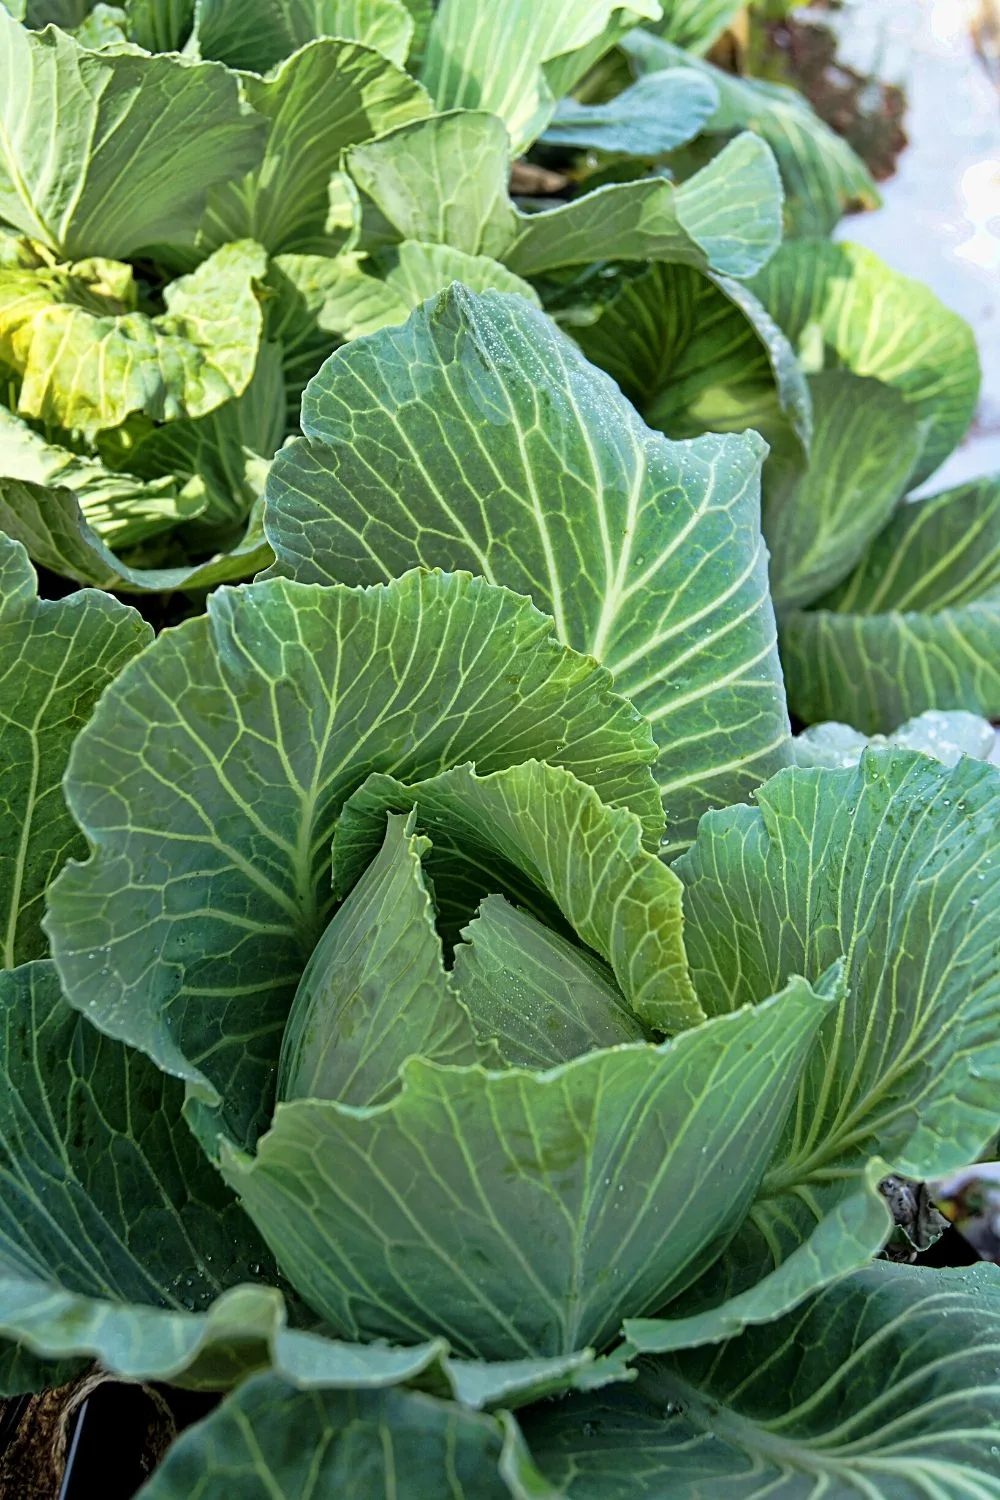 Despite being a challenging plant to grow, you can plant Cabbage in your northeast-facing garden